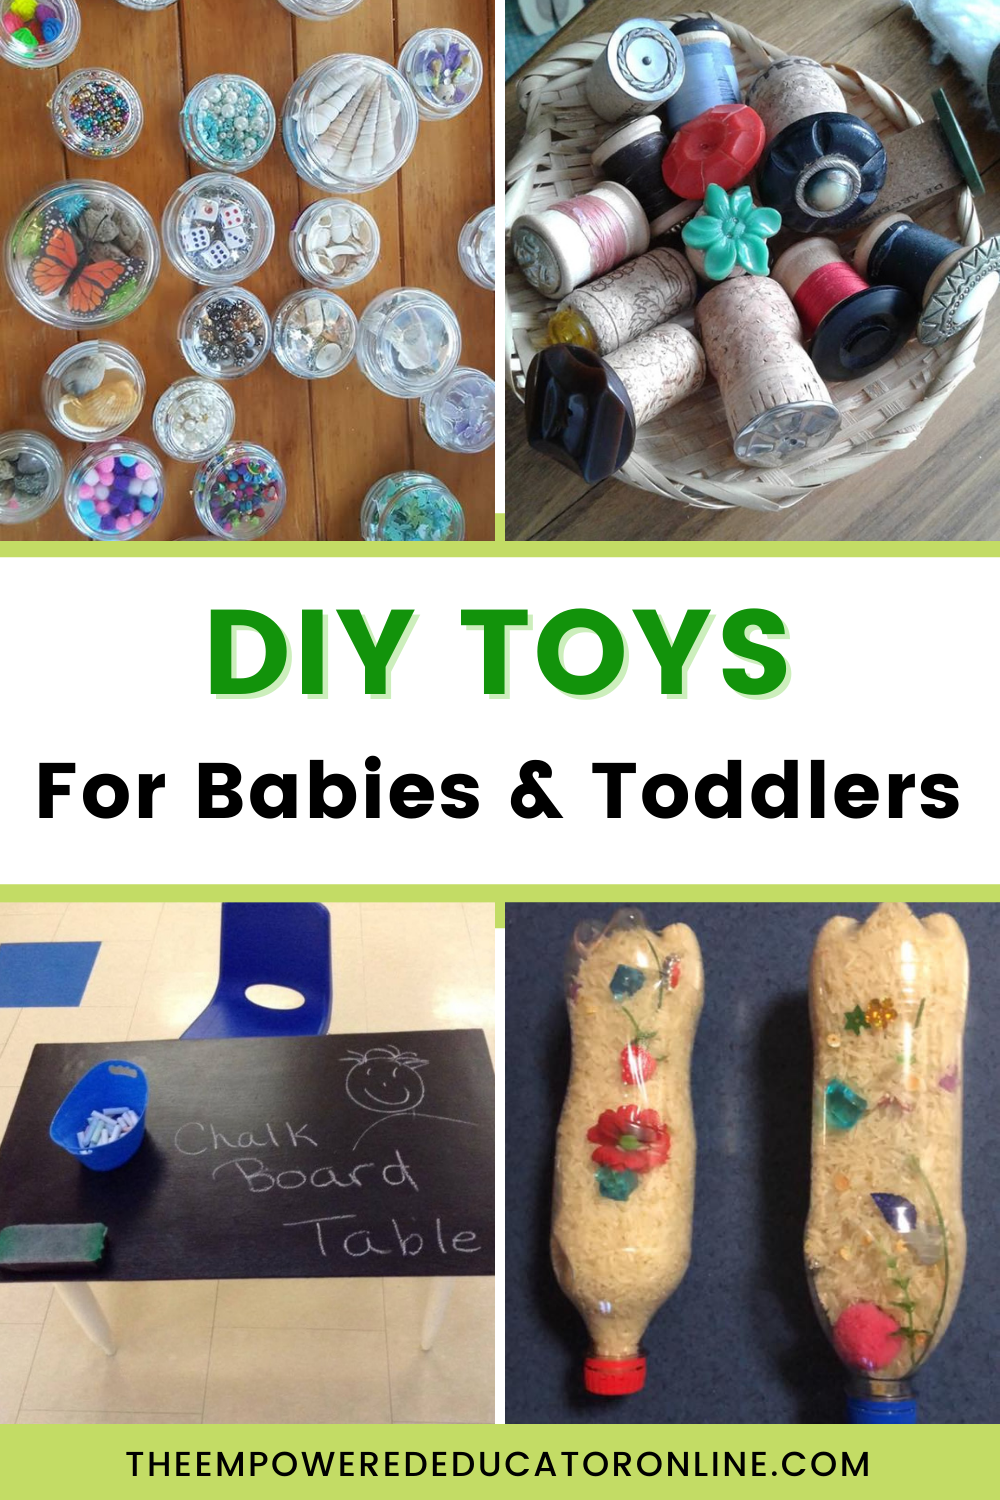 DIY Toys for Babies and Toddlers